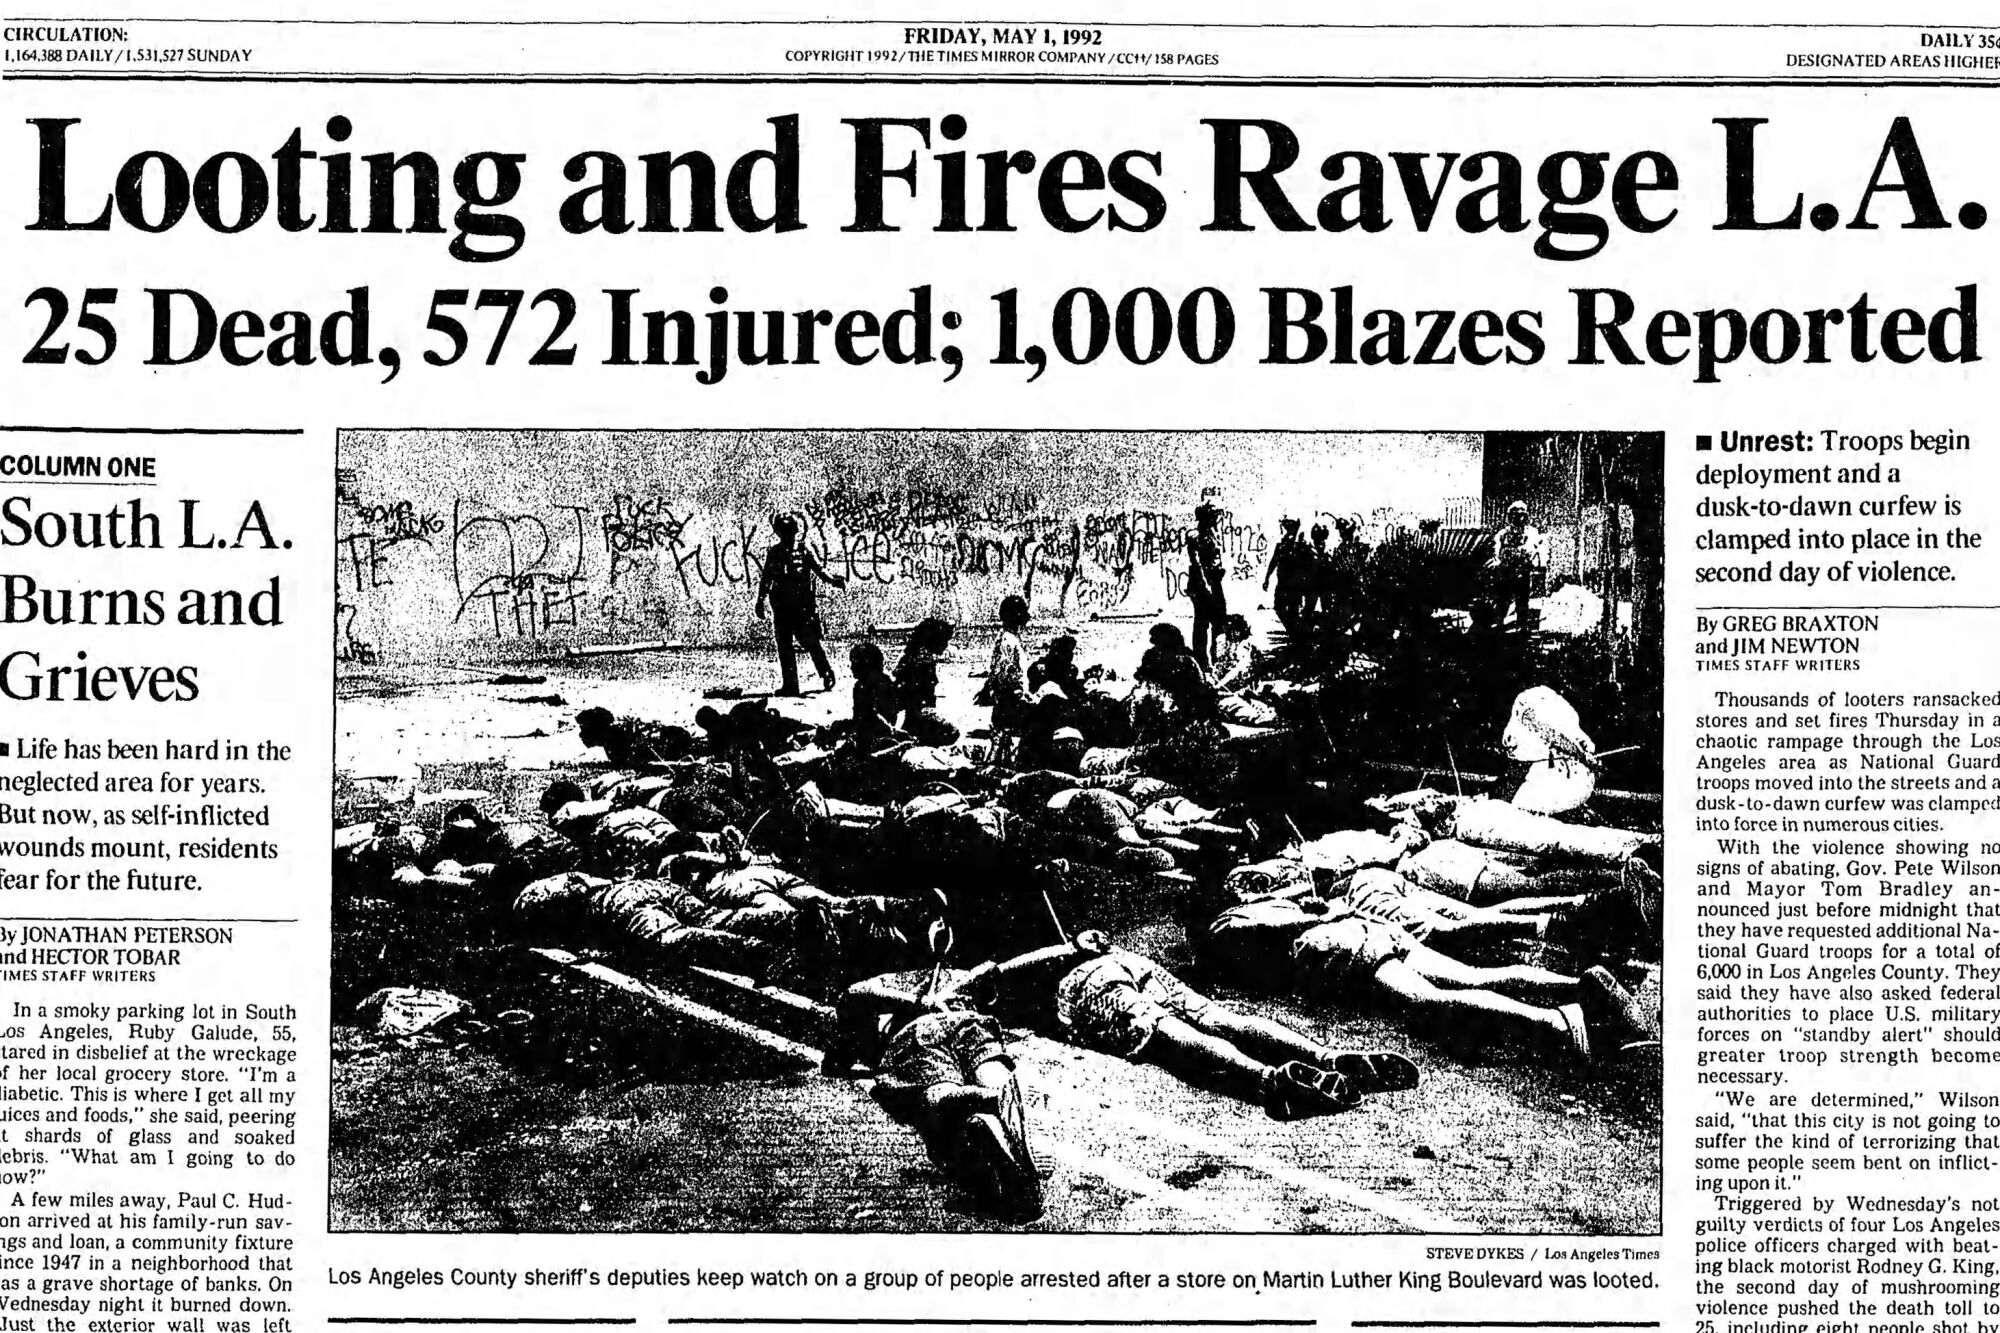 1992 LA Times front page headline reads "Looting and fires ravage LA. 25 dead, 572 injured; 1,000 blazes reported"